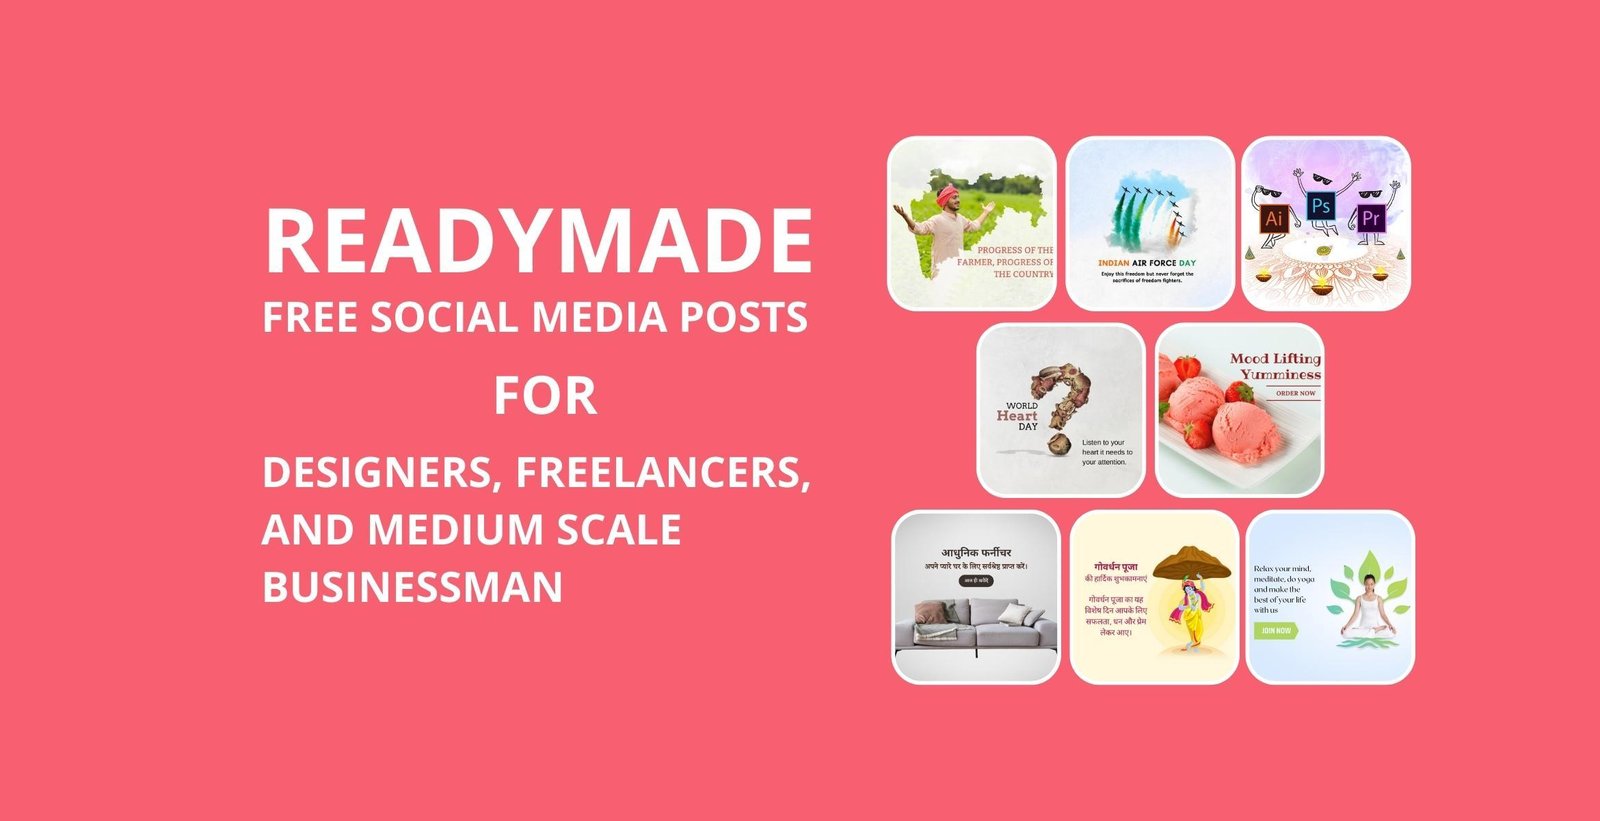 Picwale-Readymade Free Social Media Posts